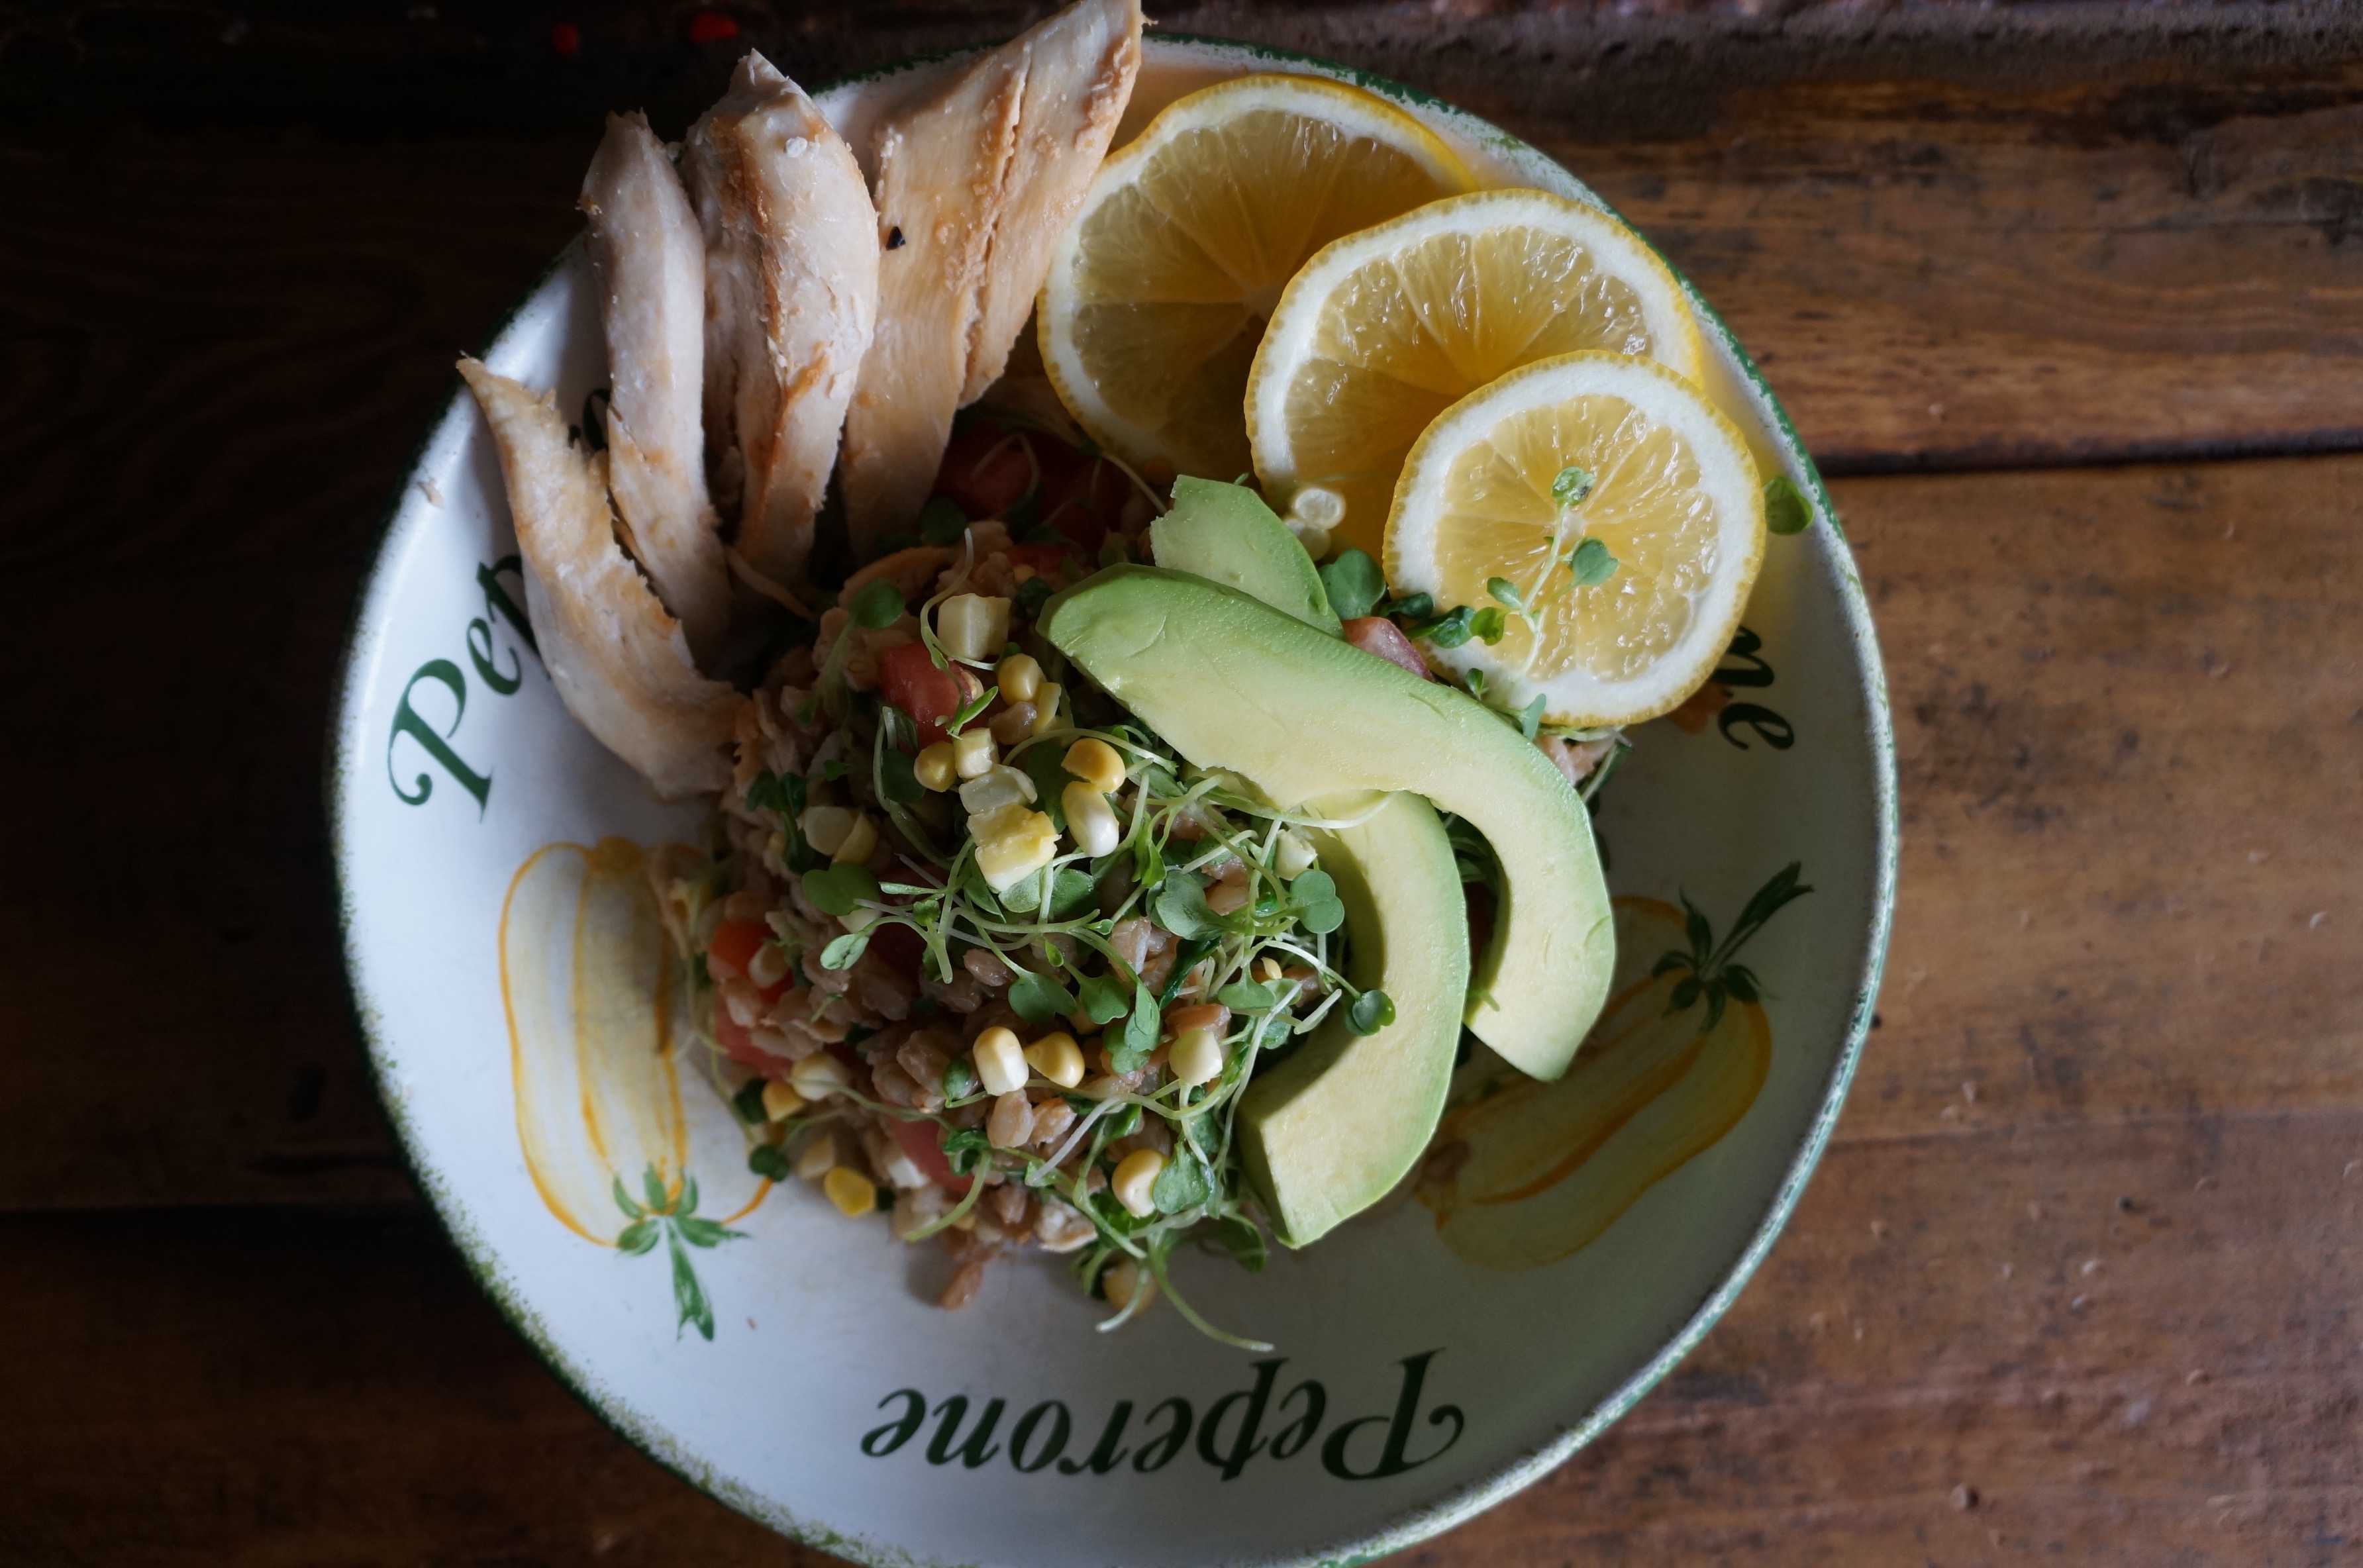 Greens And Grains – The New “Carb” Bowl